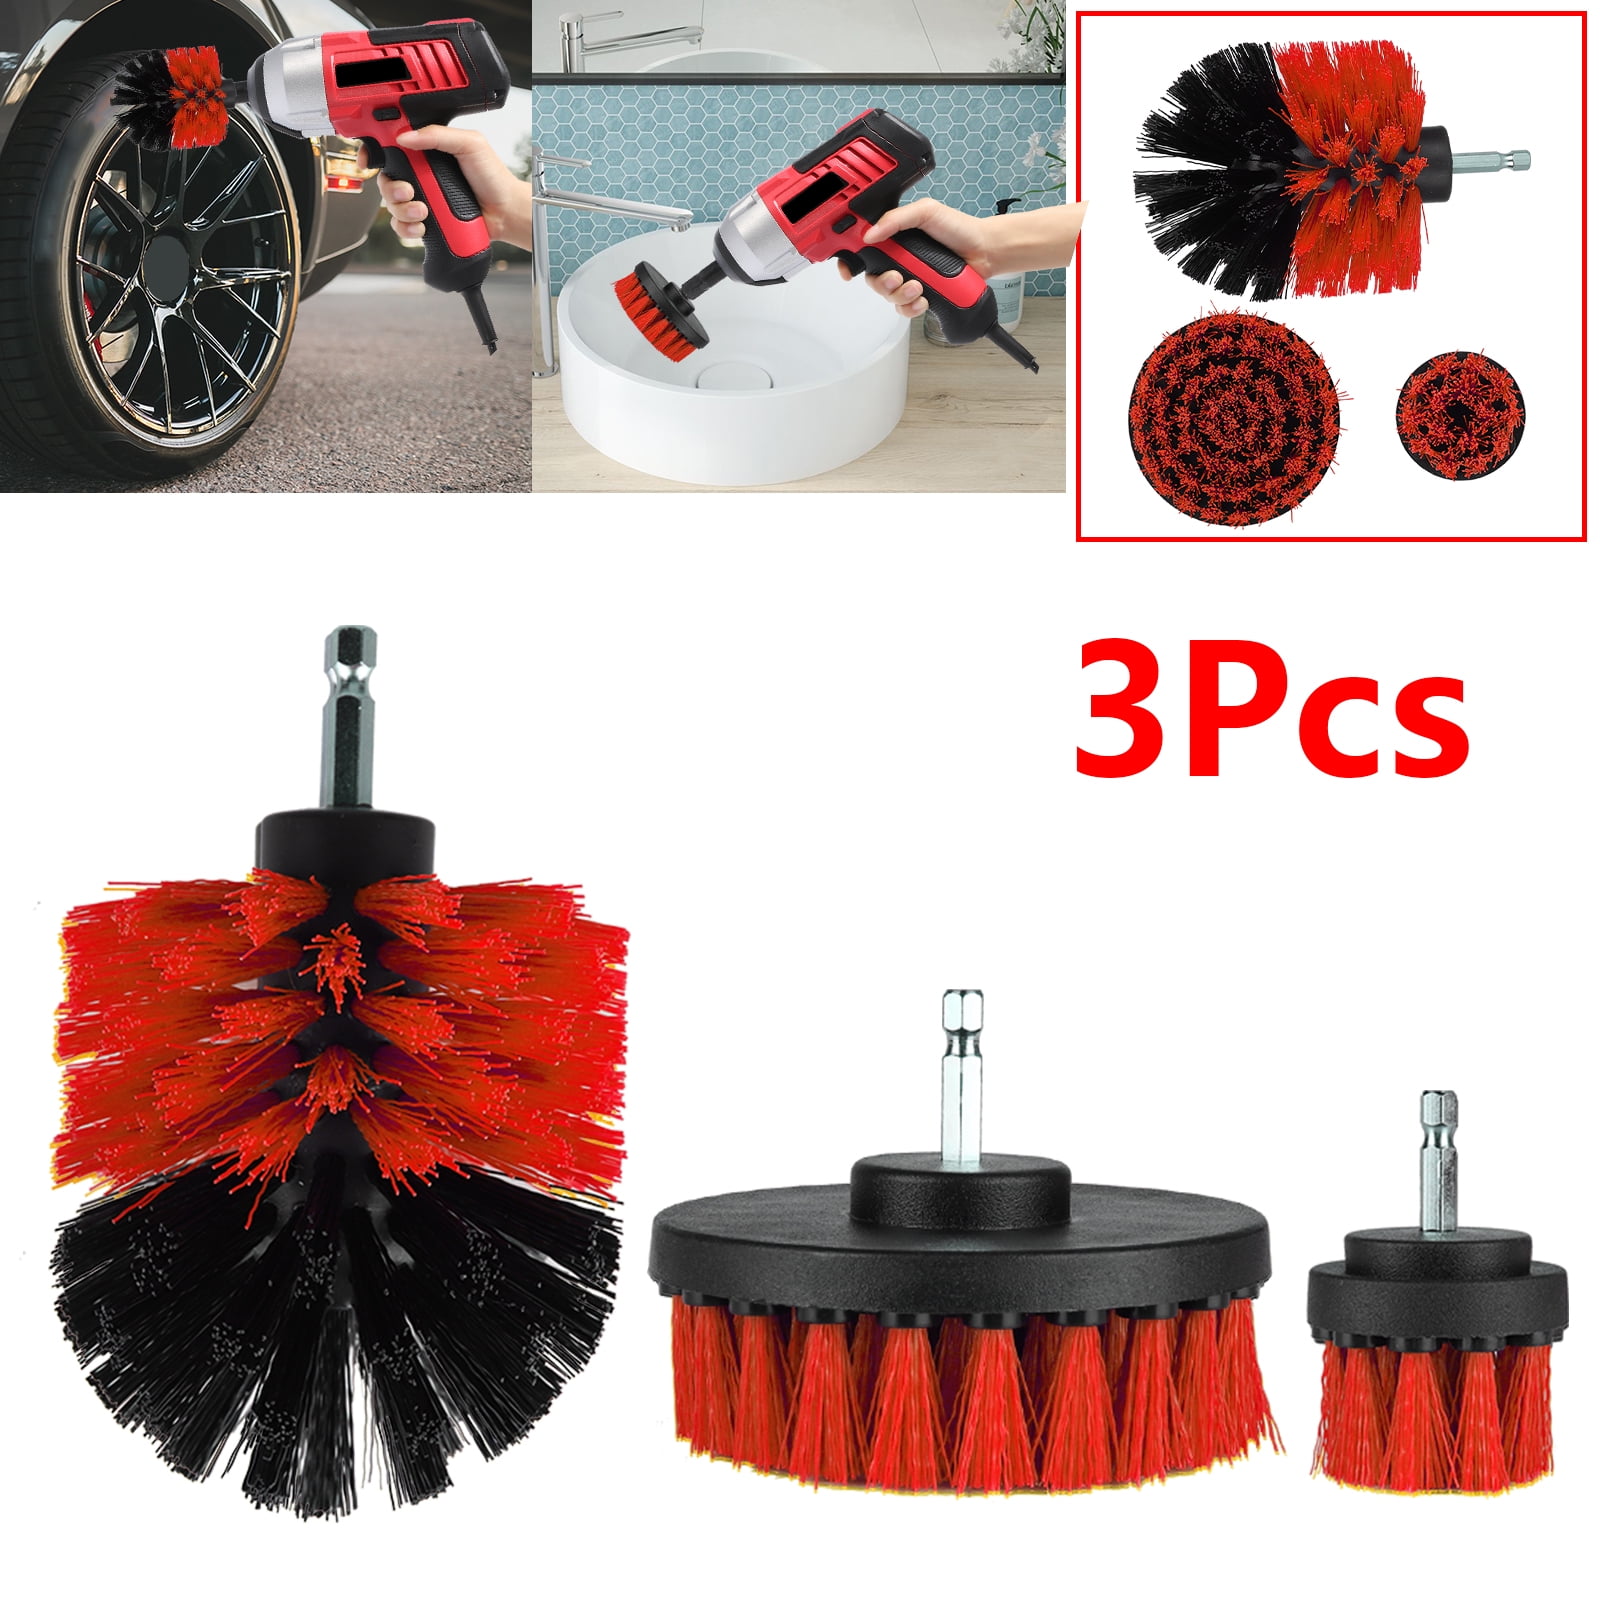 3Pcs Scrub Drill brush Attachment Time Saving Kit Scrubber Cleaning For Car home 